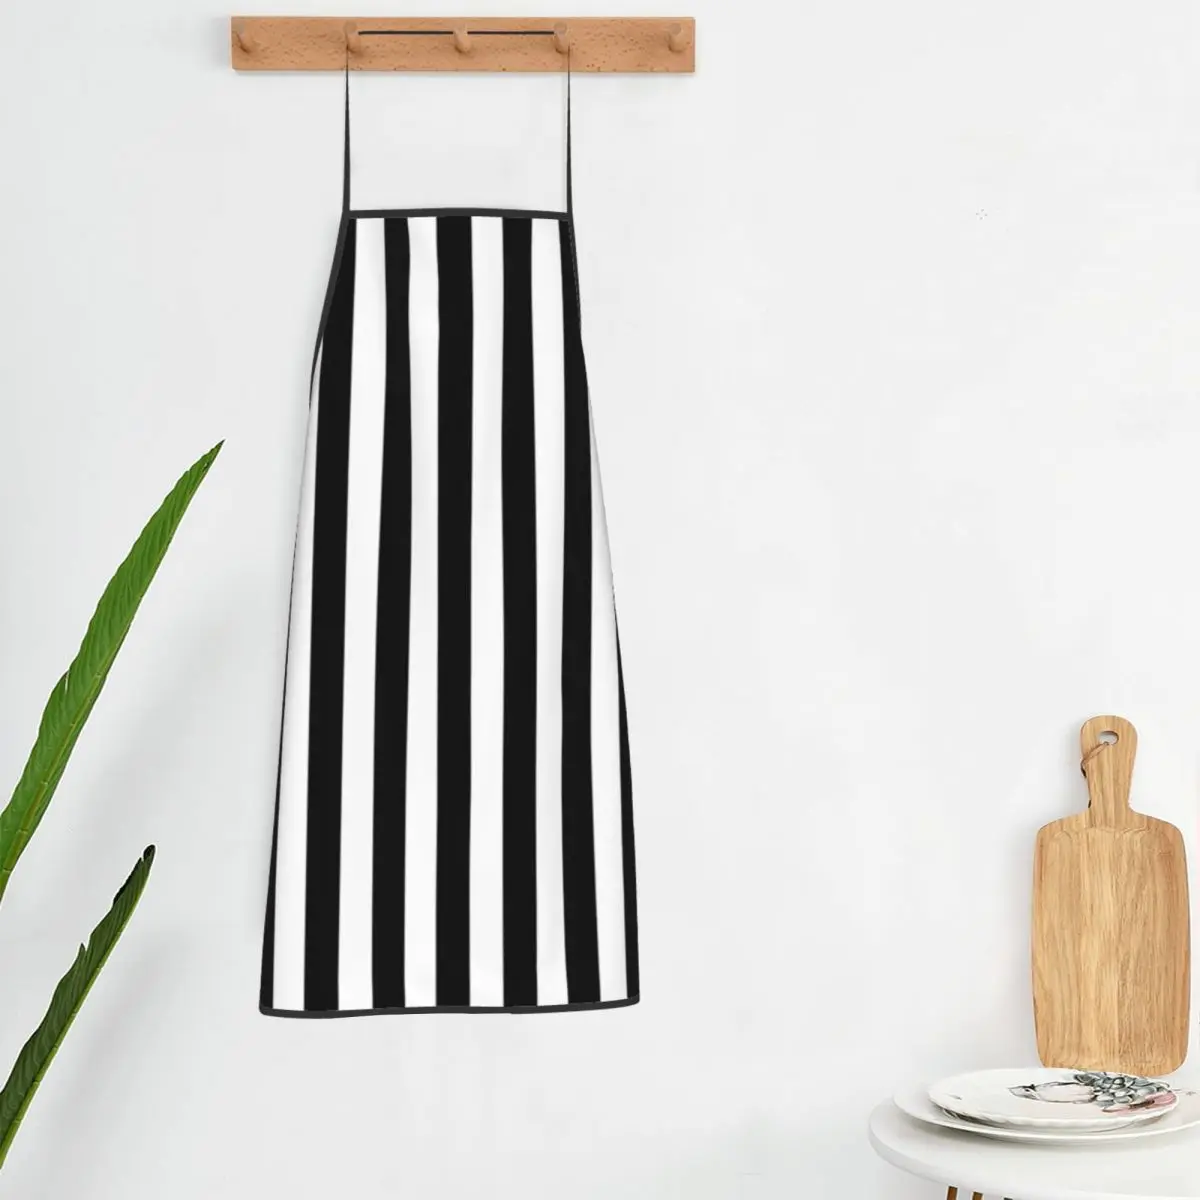 

Vintage Striped Print Apron Black White Vertical Stripes Adult Barbecue Kitchen Accessories Cleaning Cute Aprons without Pocket